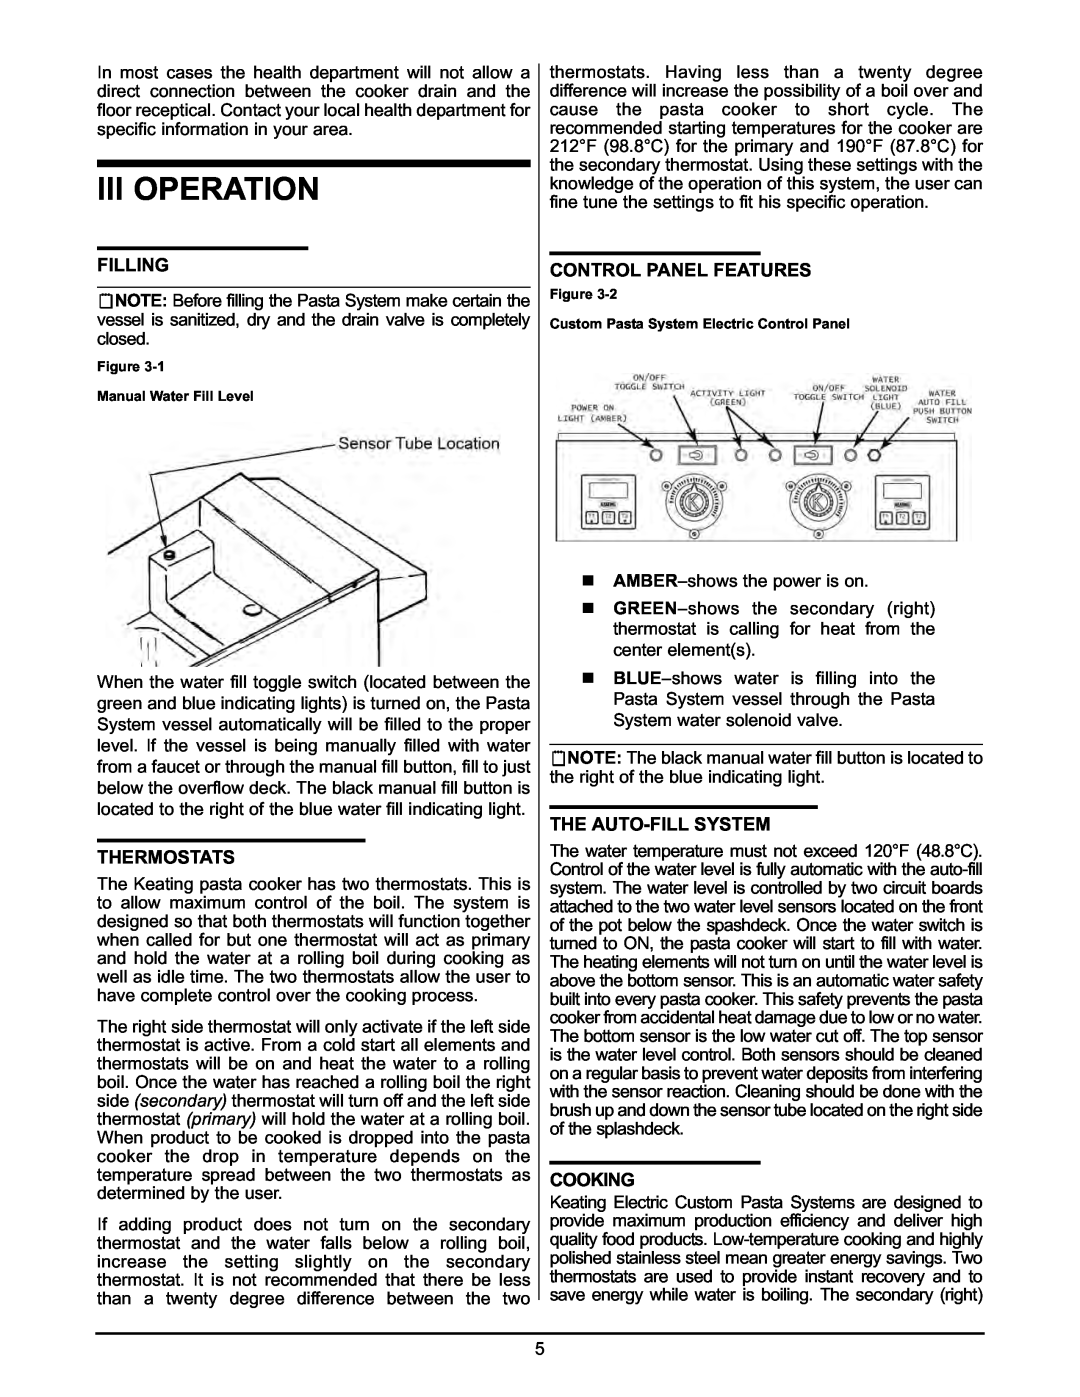 Keating Of Chicago 2009 manual Iii Operation, Filling, Thermostats, Control Panel Features, The Auto-Fill System, Cooking 